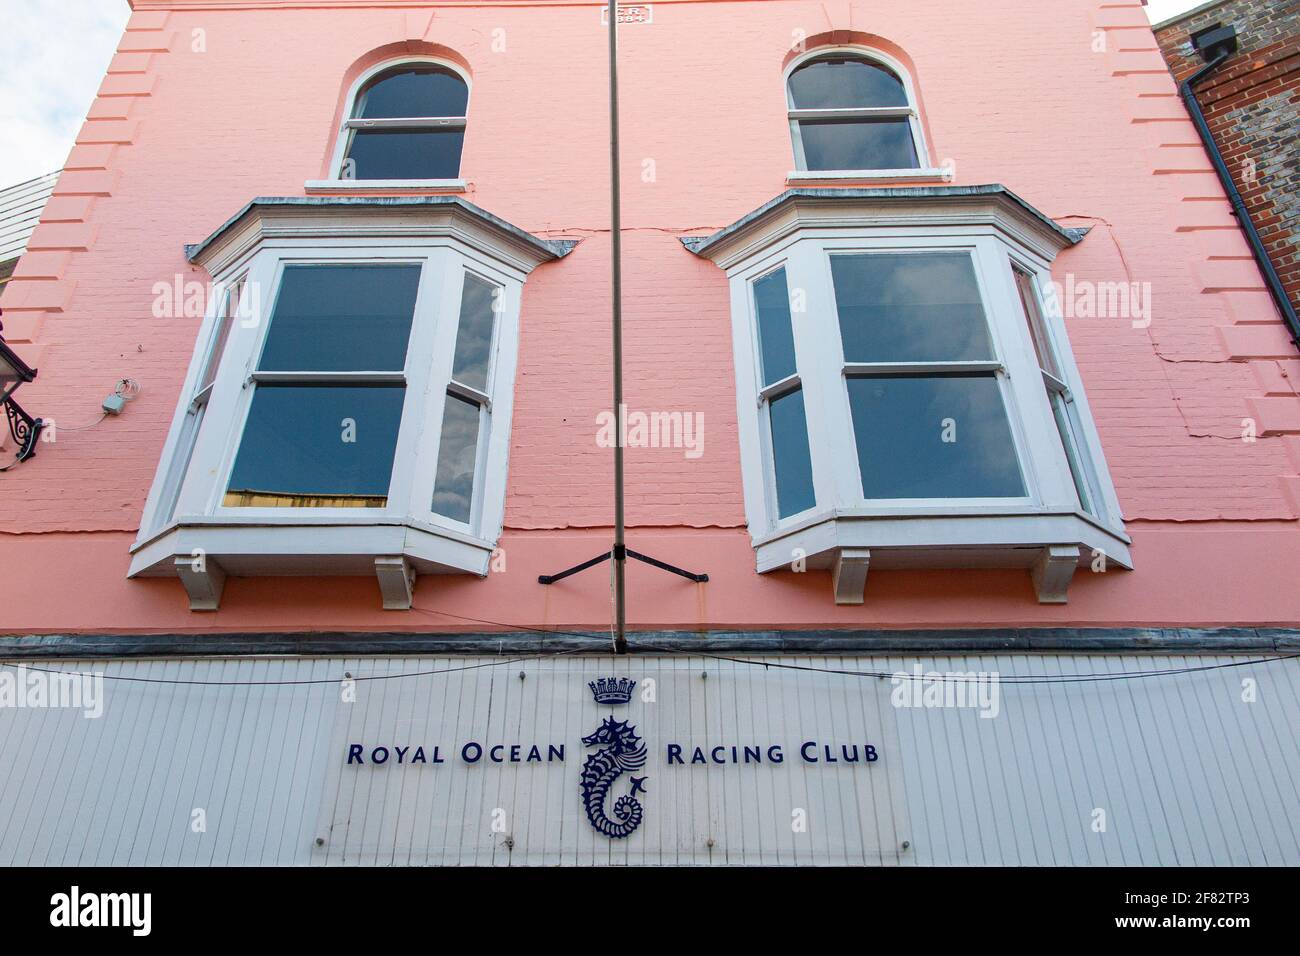 Il Royal Ocean Racing Club a Cowes, Ilse of Wight Foto Stock